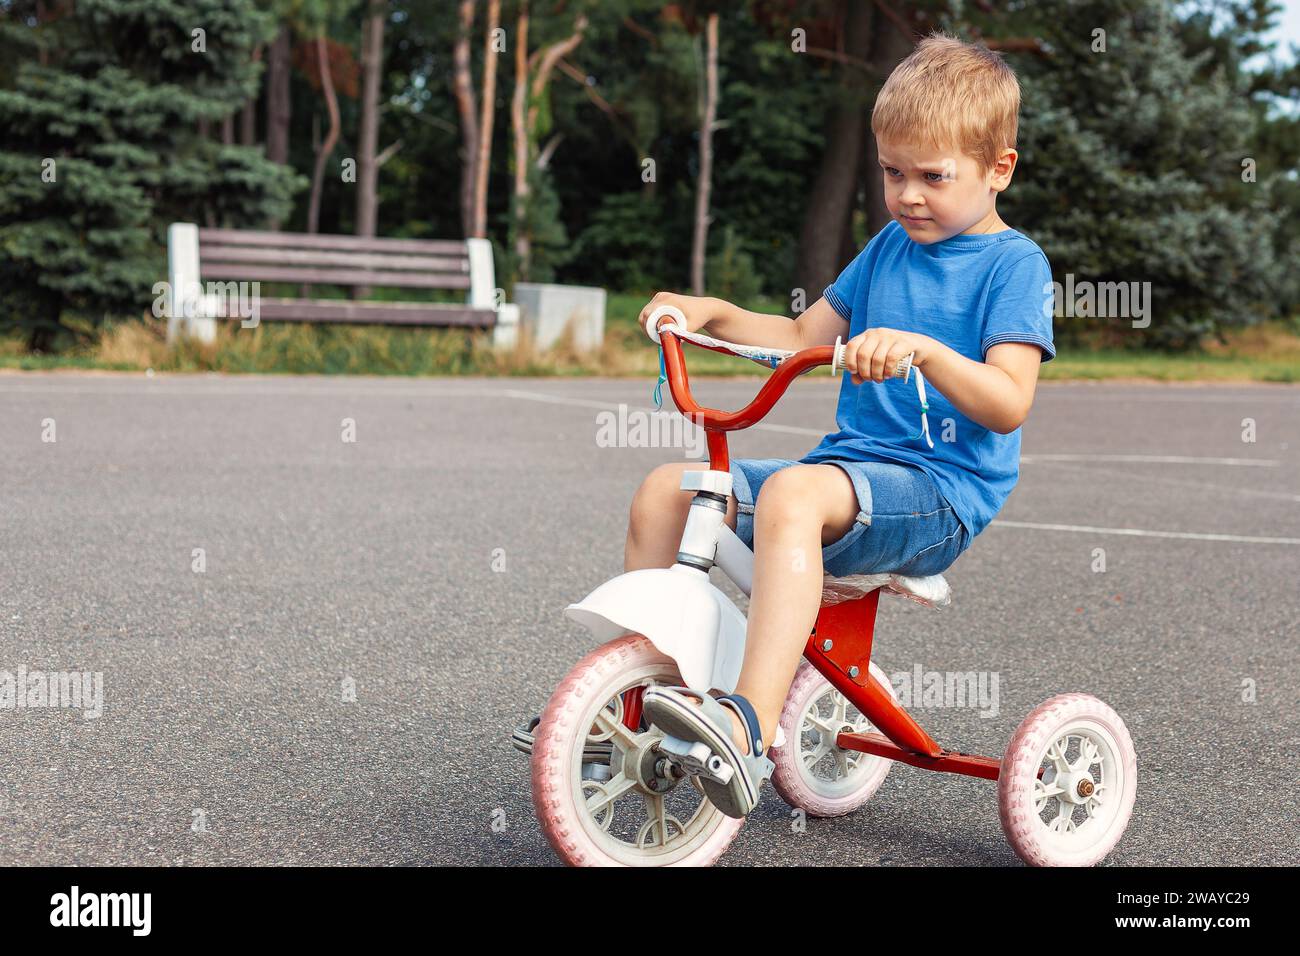 A little boy in blue clothes, very focused rides an red tricycle in city park. Stock Photo